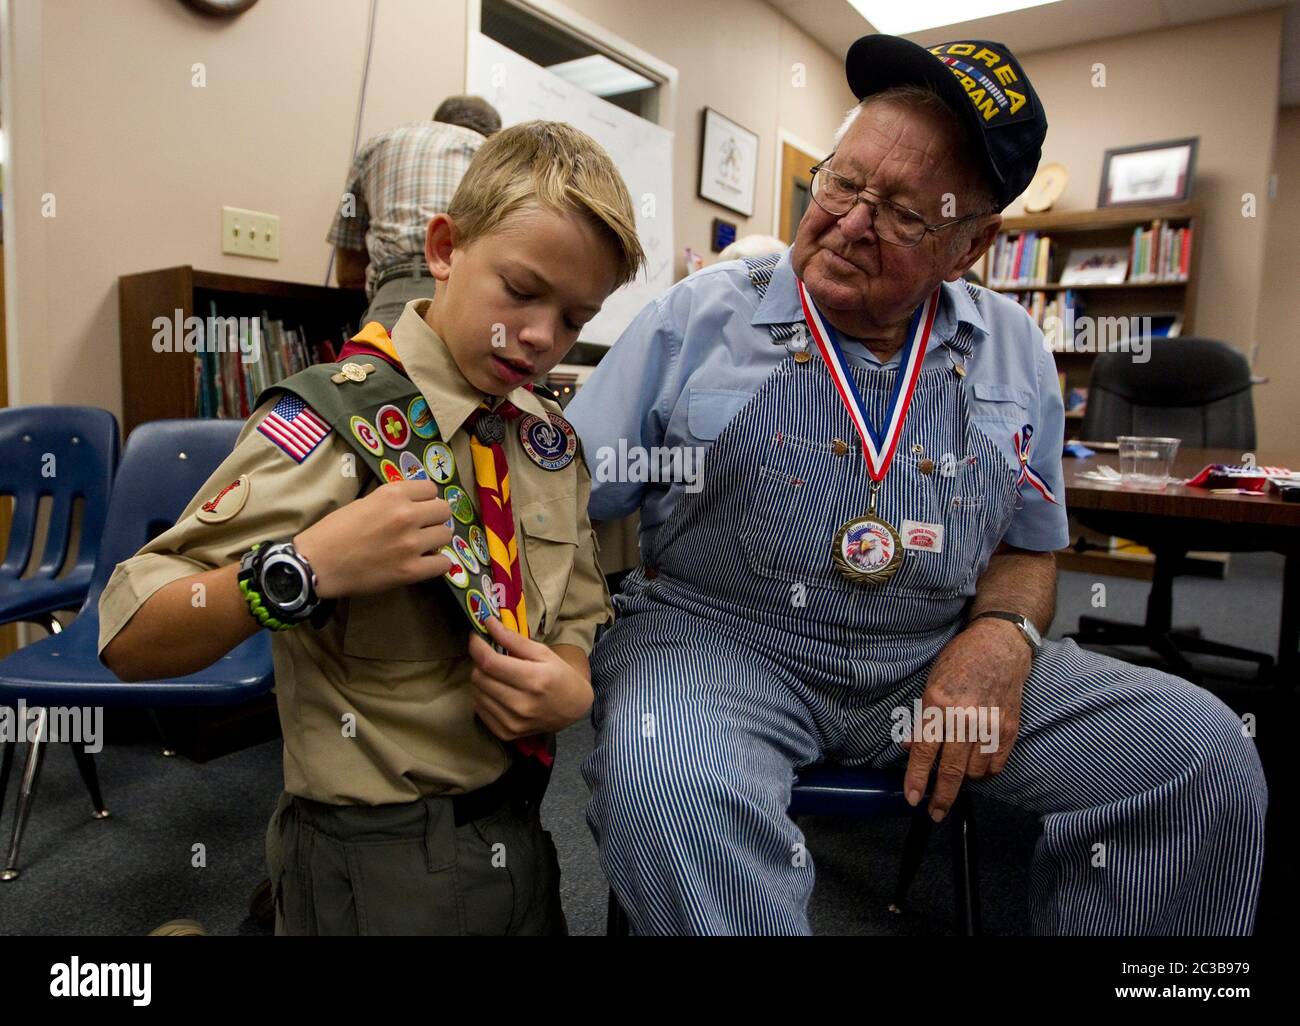 Dime Box Texas USA, November 12 2012:13-year-old Boy Scout shows his merit badges to a Korean War veteran during a Veteran's Day celebration at a school in the small town. ©MKC / Daemmrich Photos Stock Photo